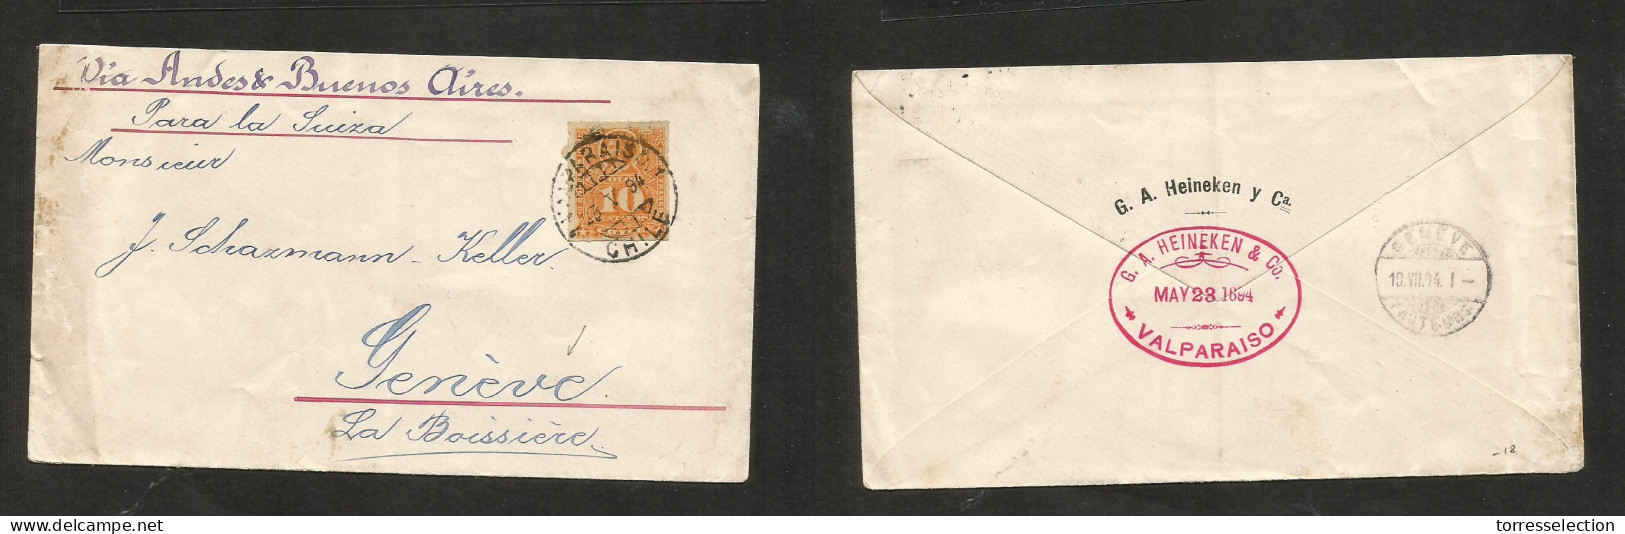 CHILE. 1894 (23 May) Valp - Switzerland, Geneve (10 July) Via Andes - Buenos Aires. Fkd Env 10c Orange Perce, Tied Cds.  - Chile